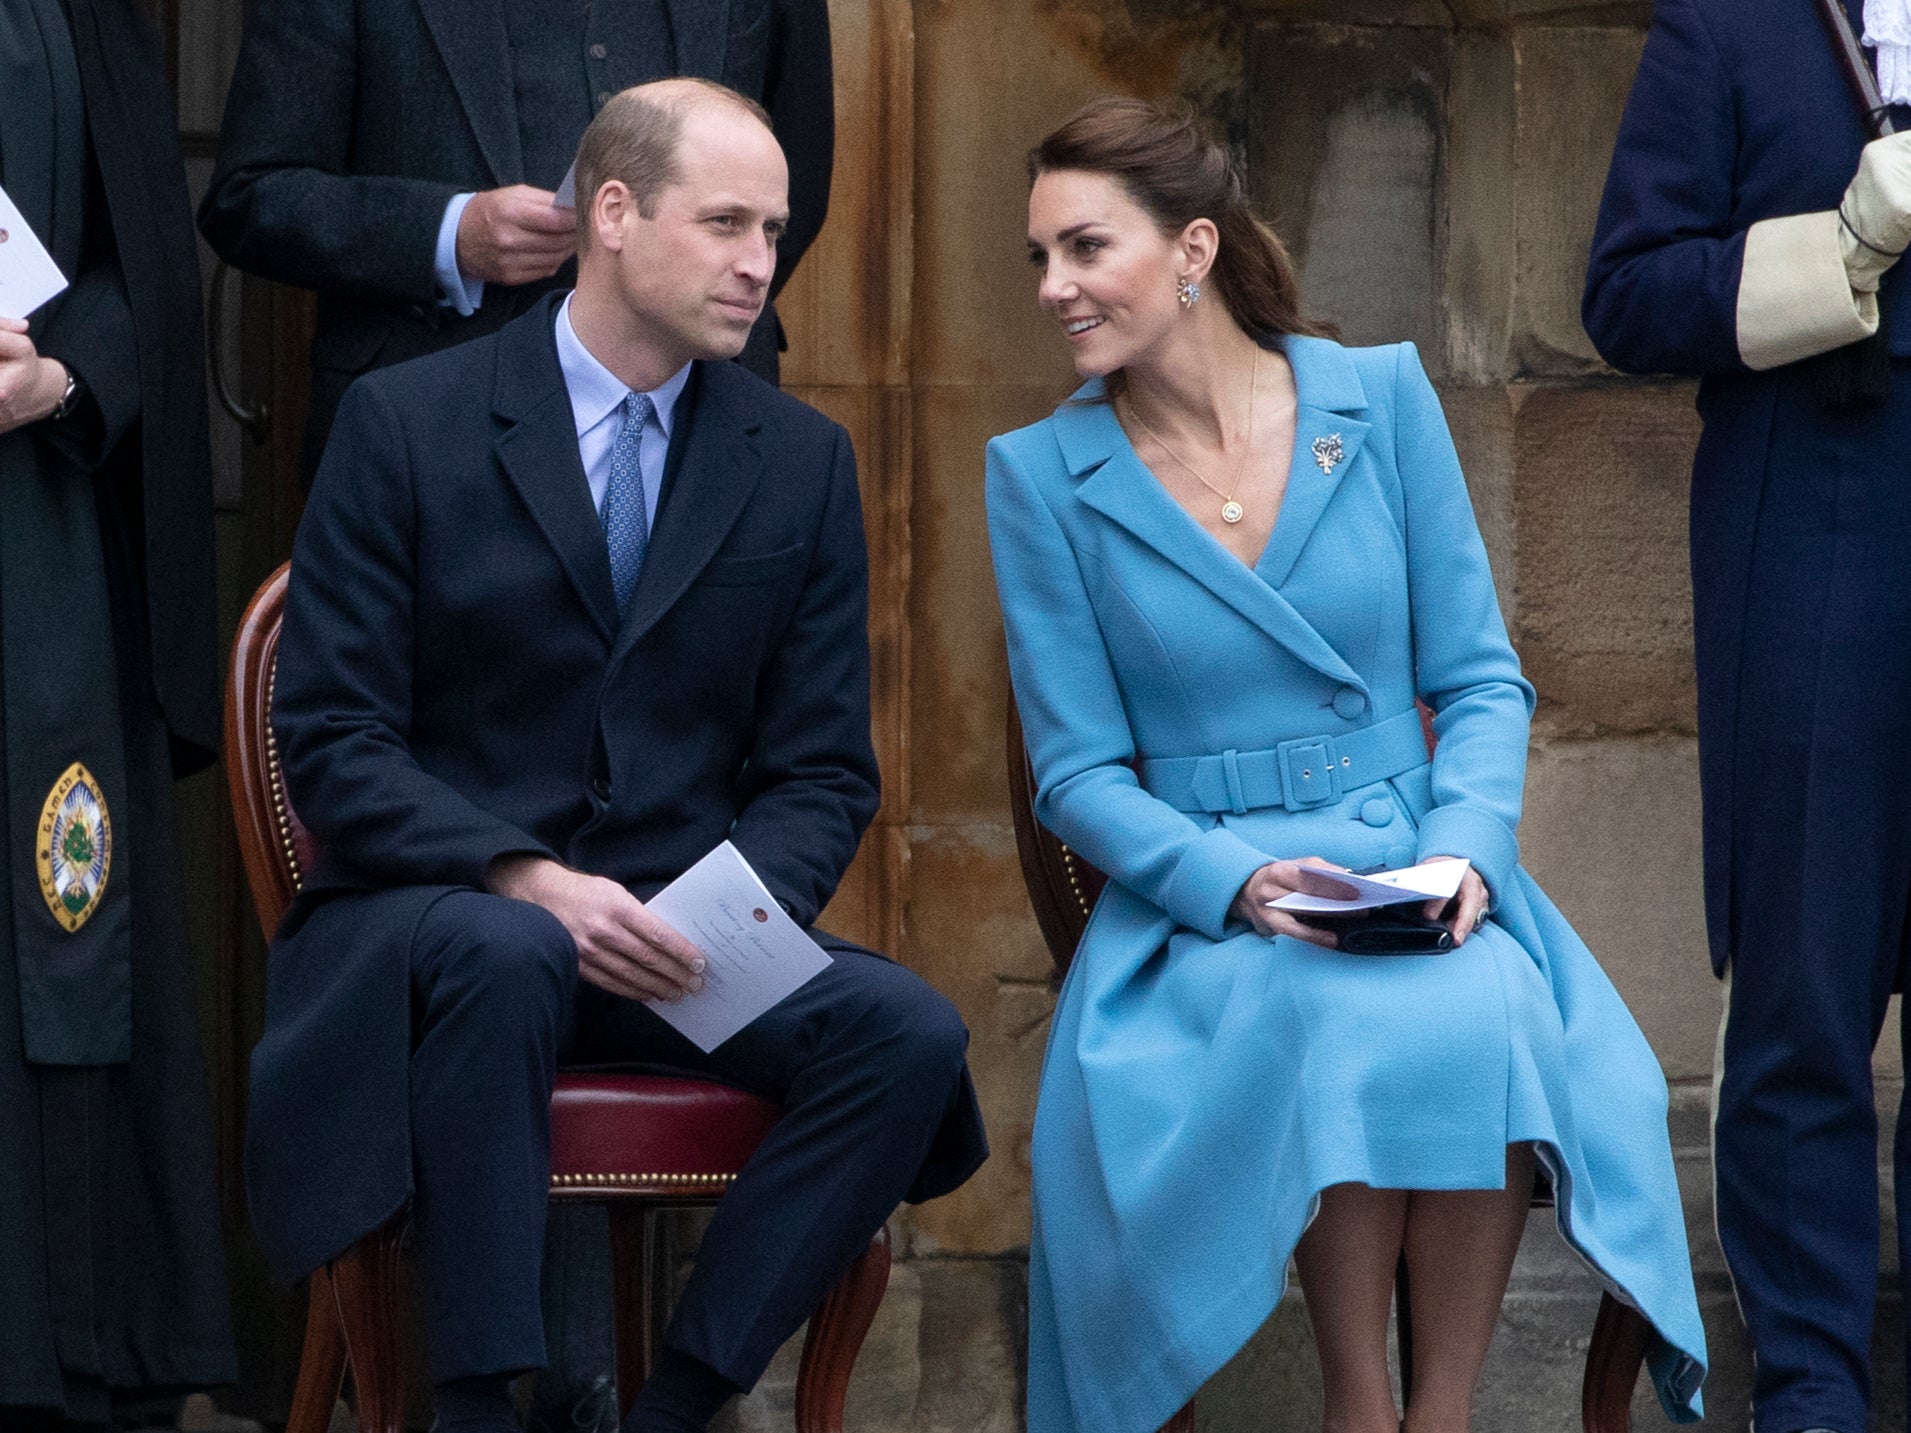 Prince William and Kate Middleton attend the Beating of the Retreat at the Palace of Holyroodhouse on May 27, 2021